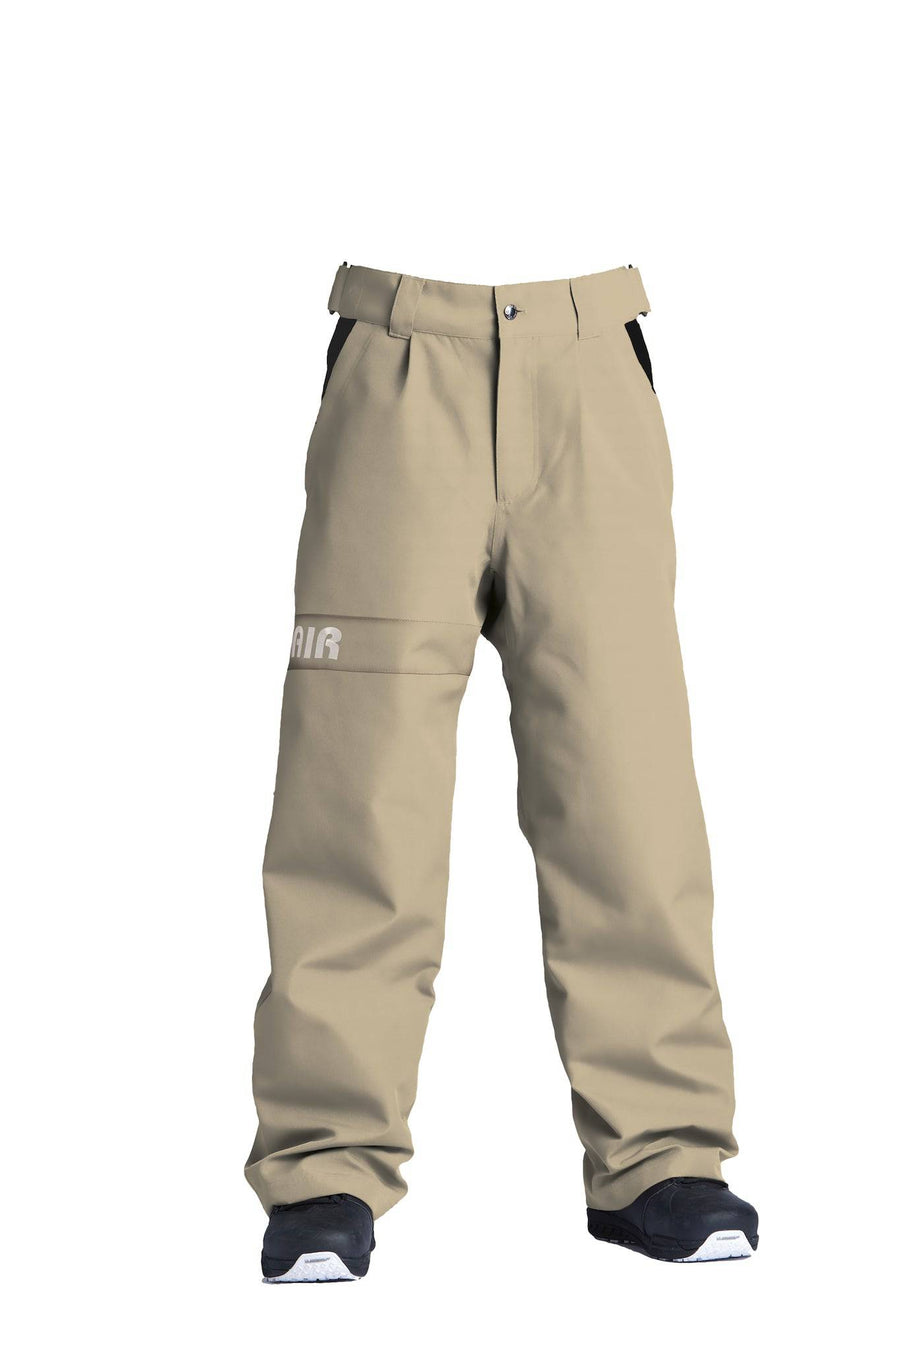 Airblaster Easy Style Pant in Chinchilla 2023